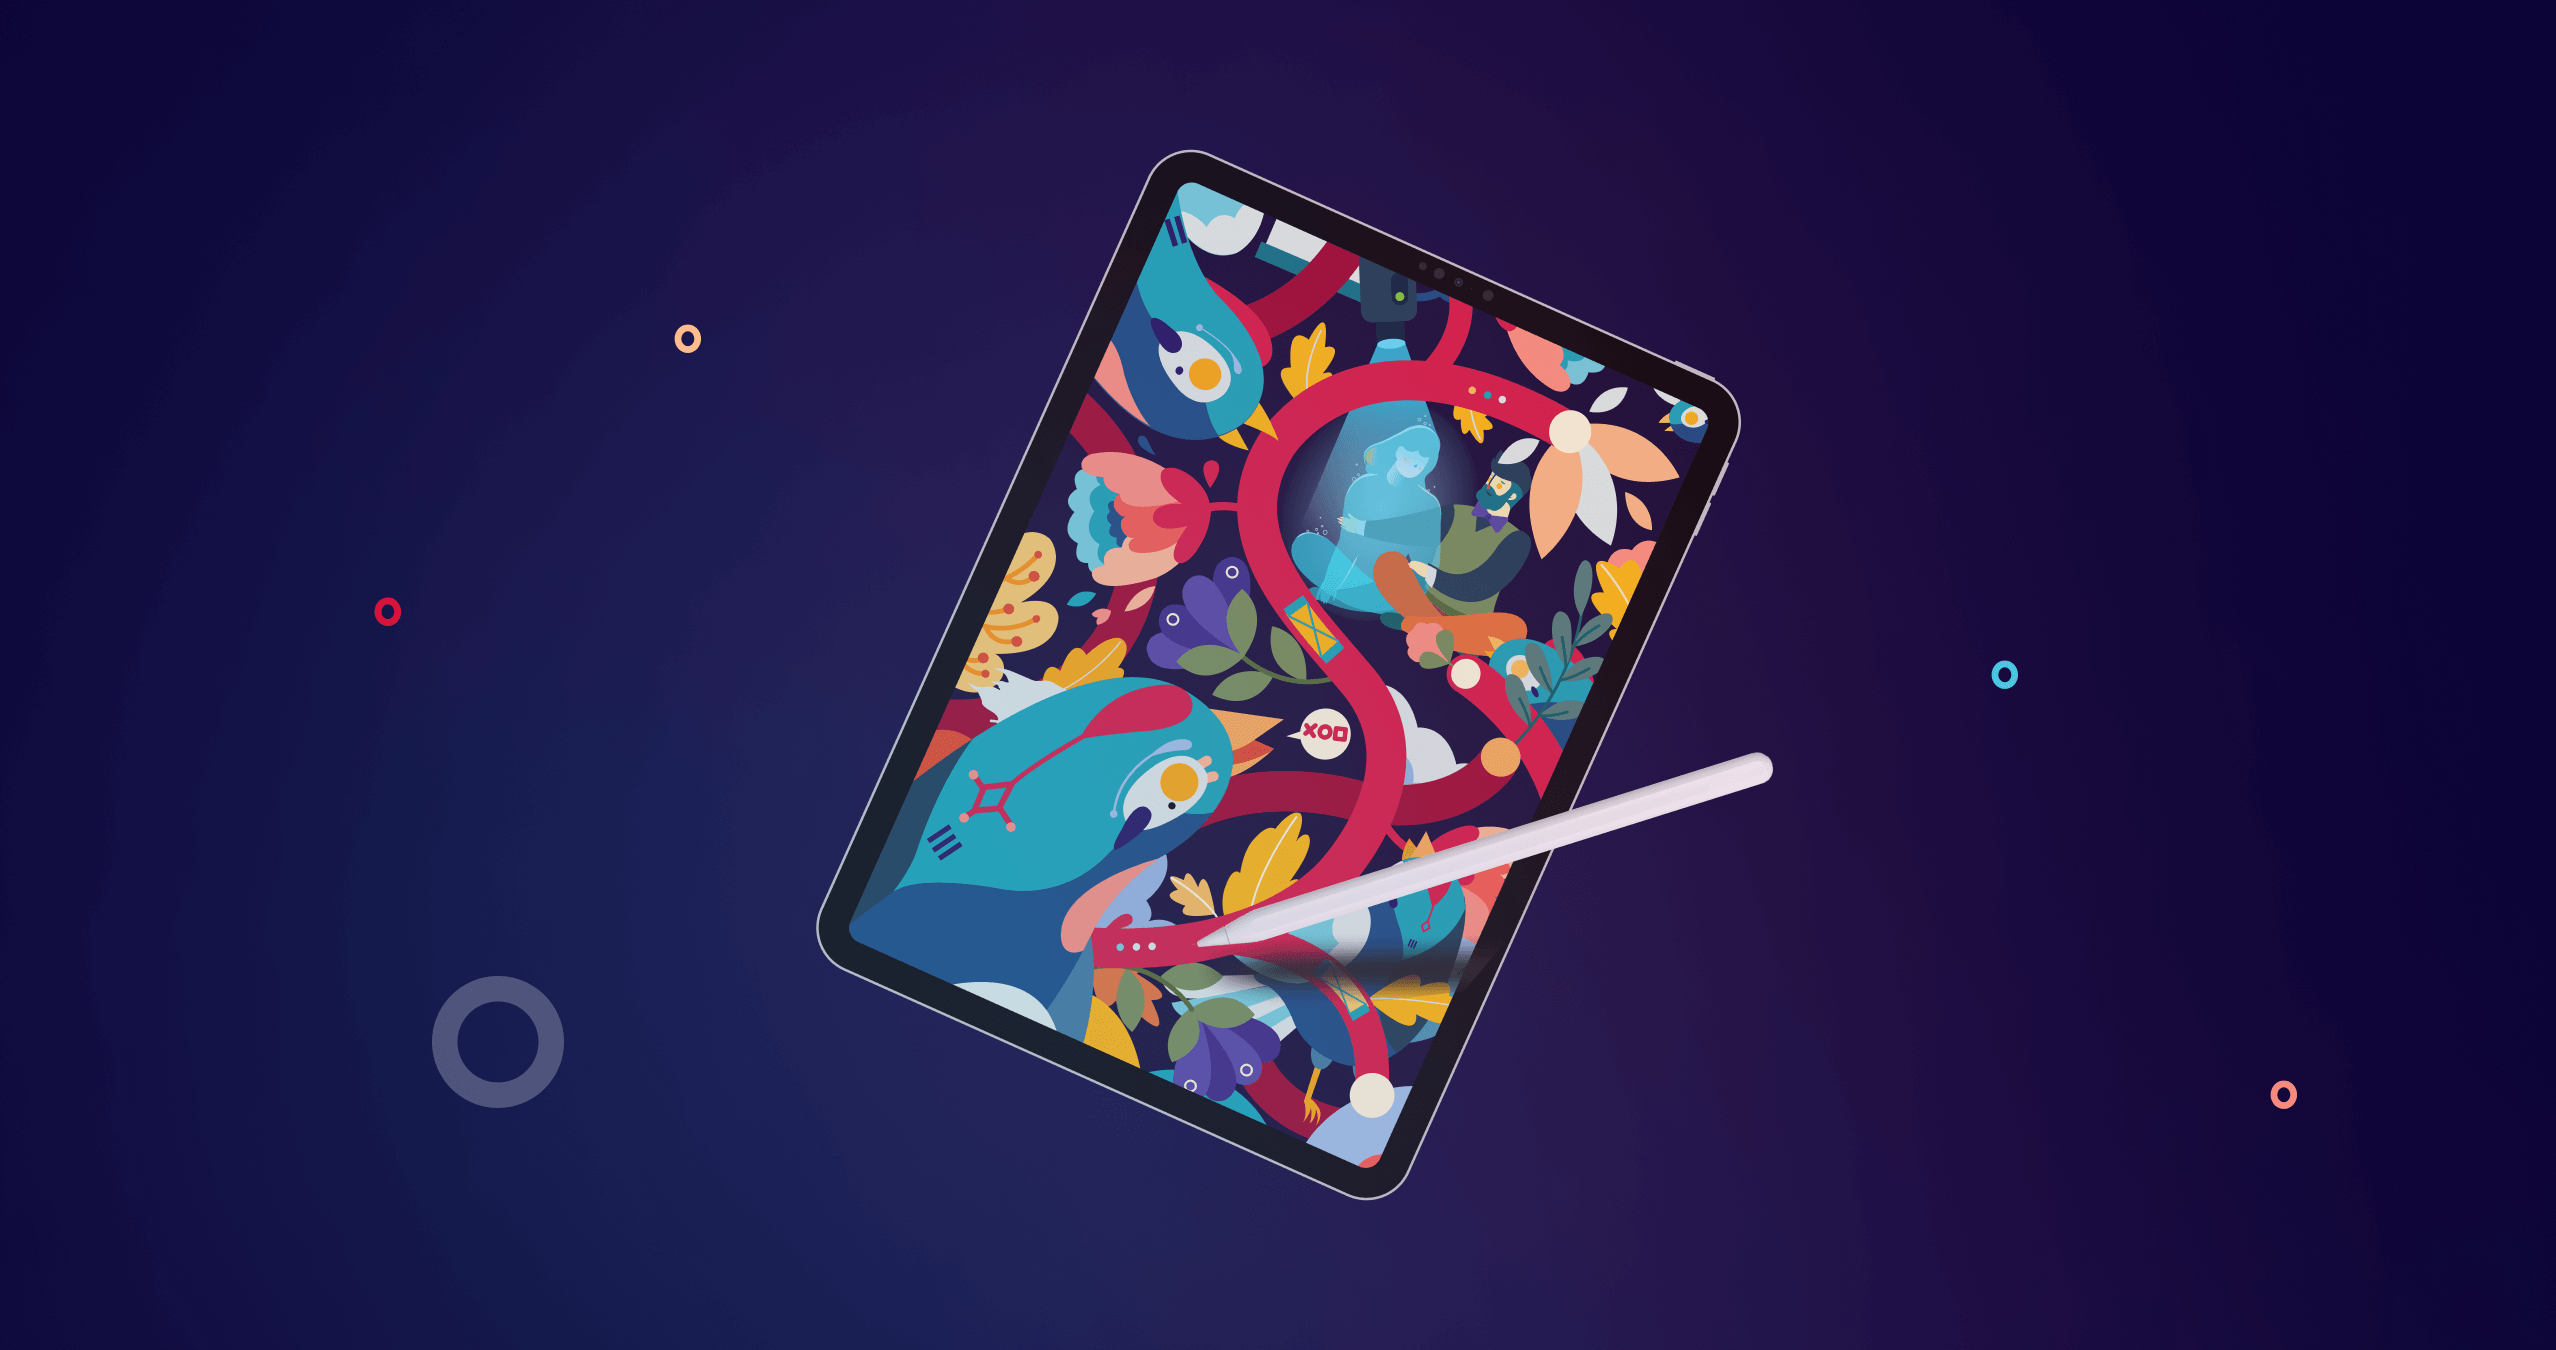 Tablet with colorful abstract art on the screen and a stylus pen